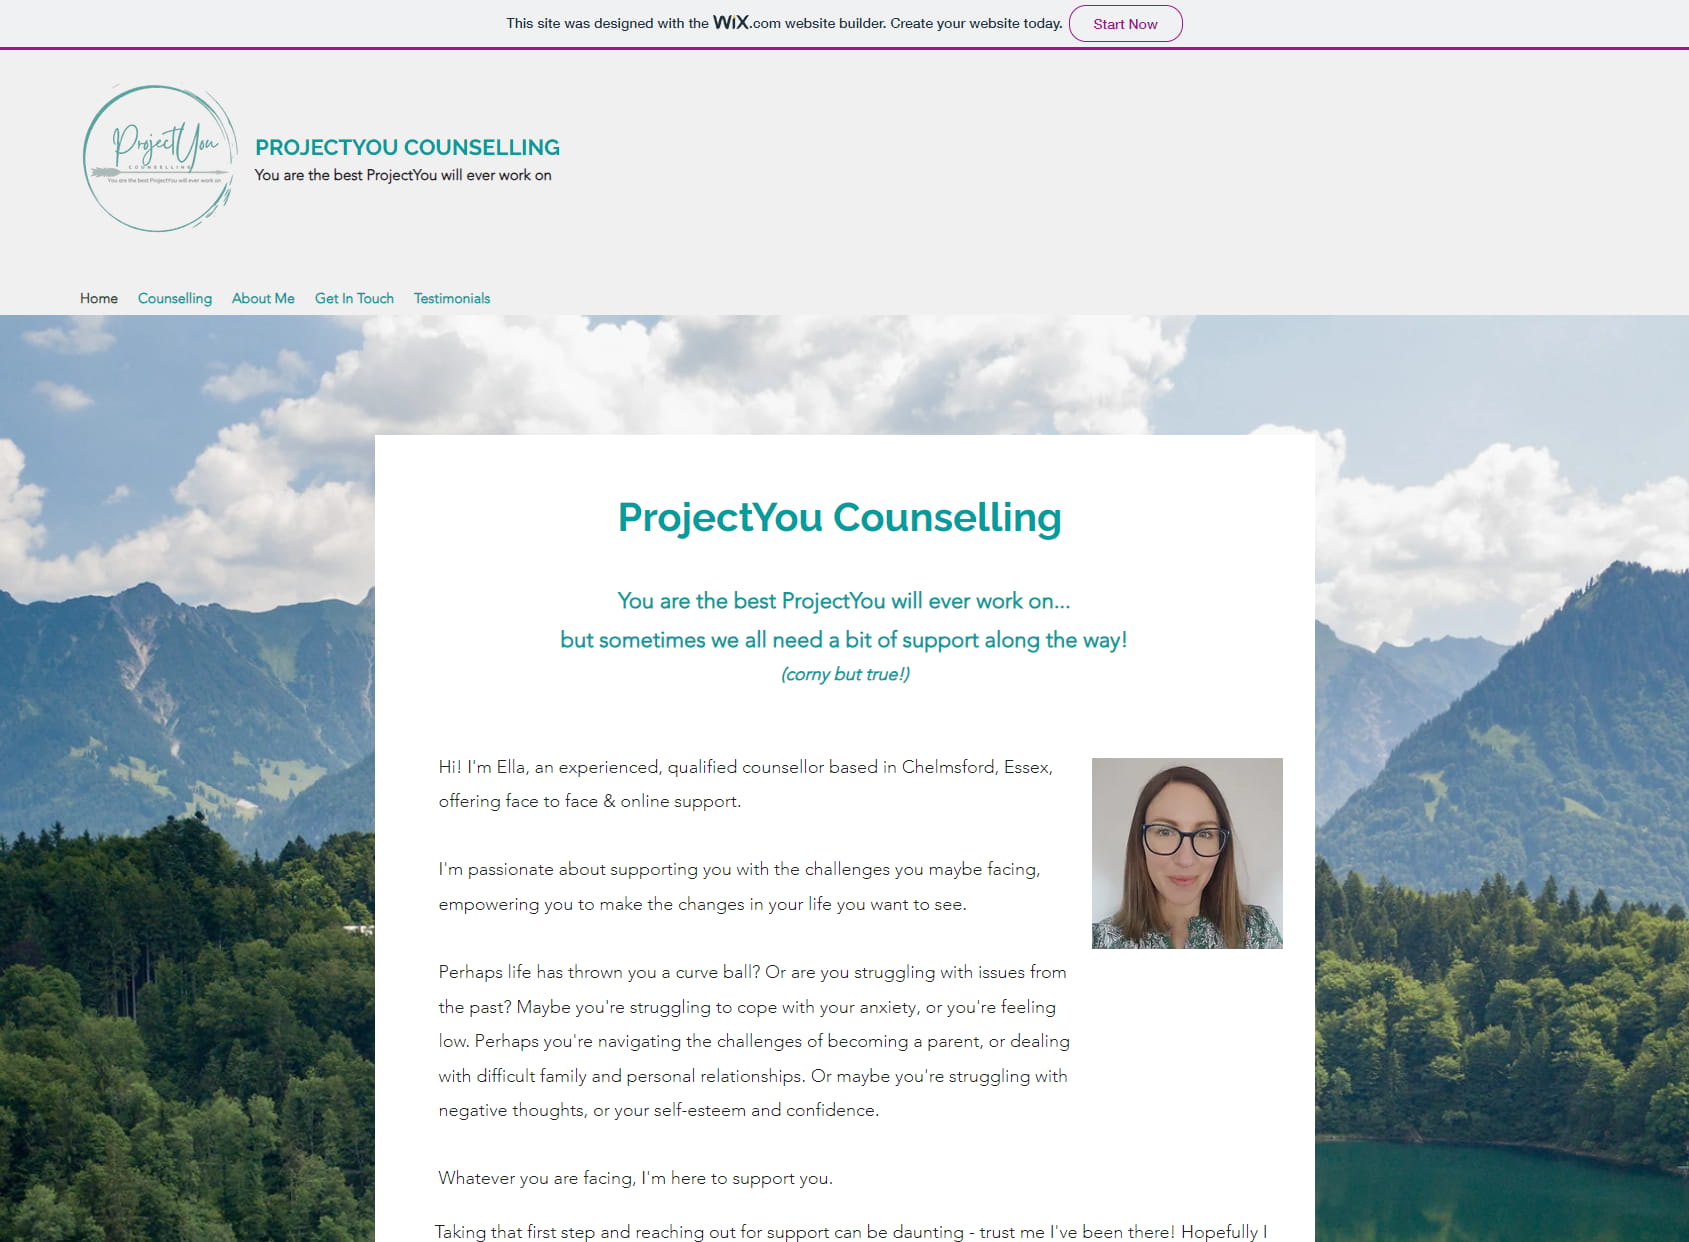 ProjectYou Counselling